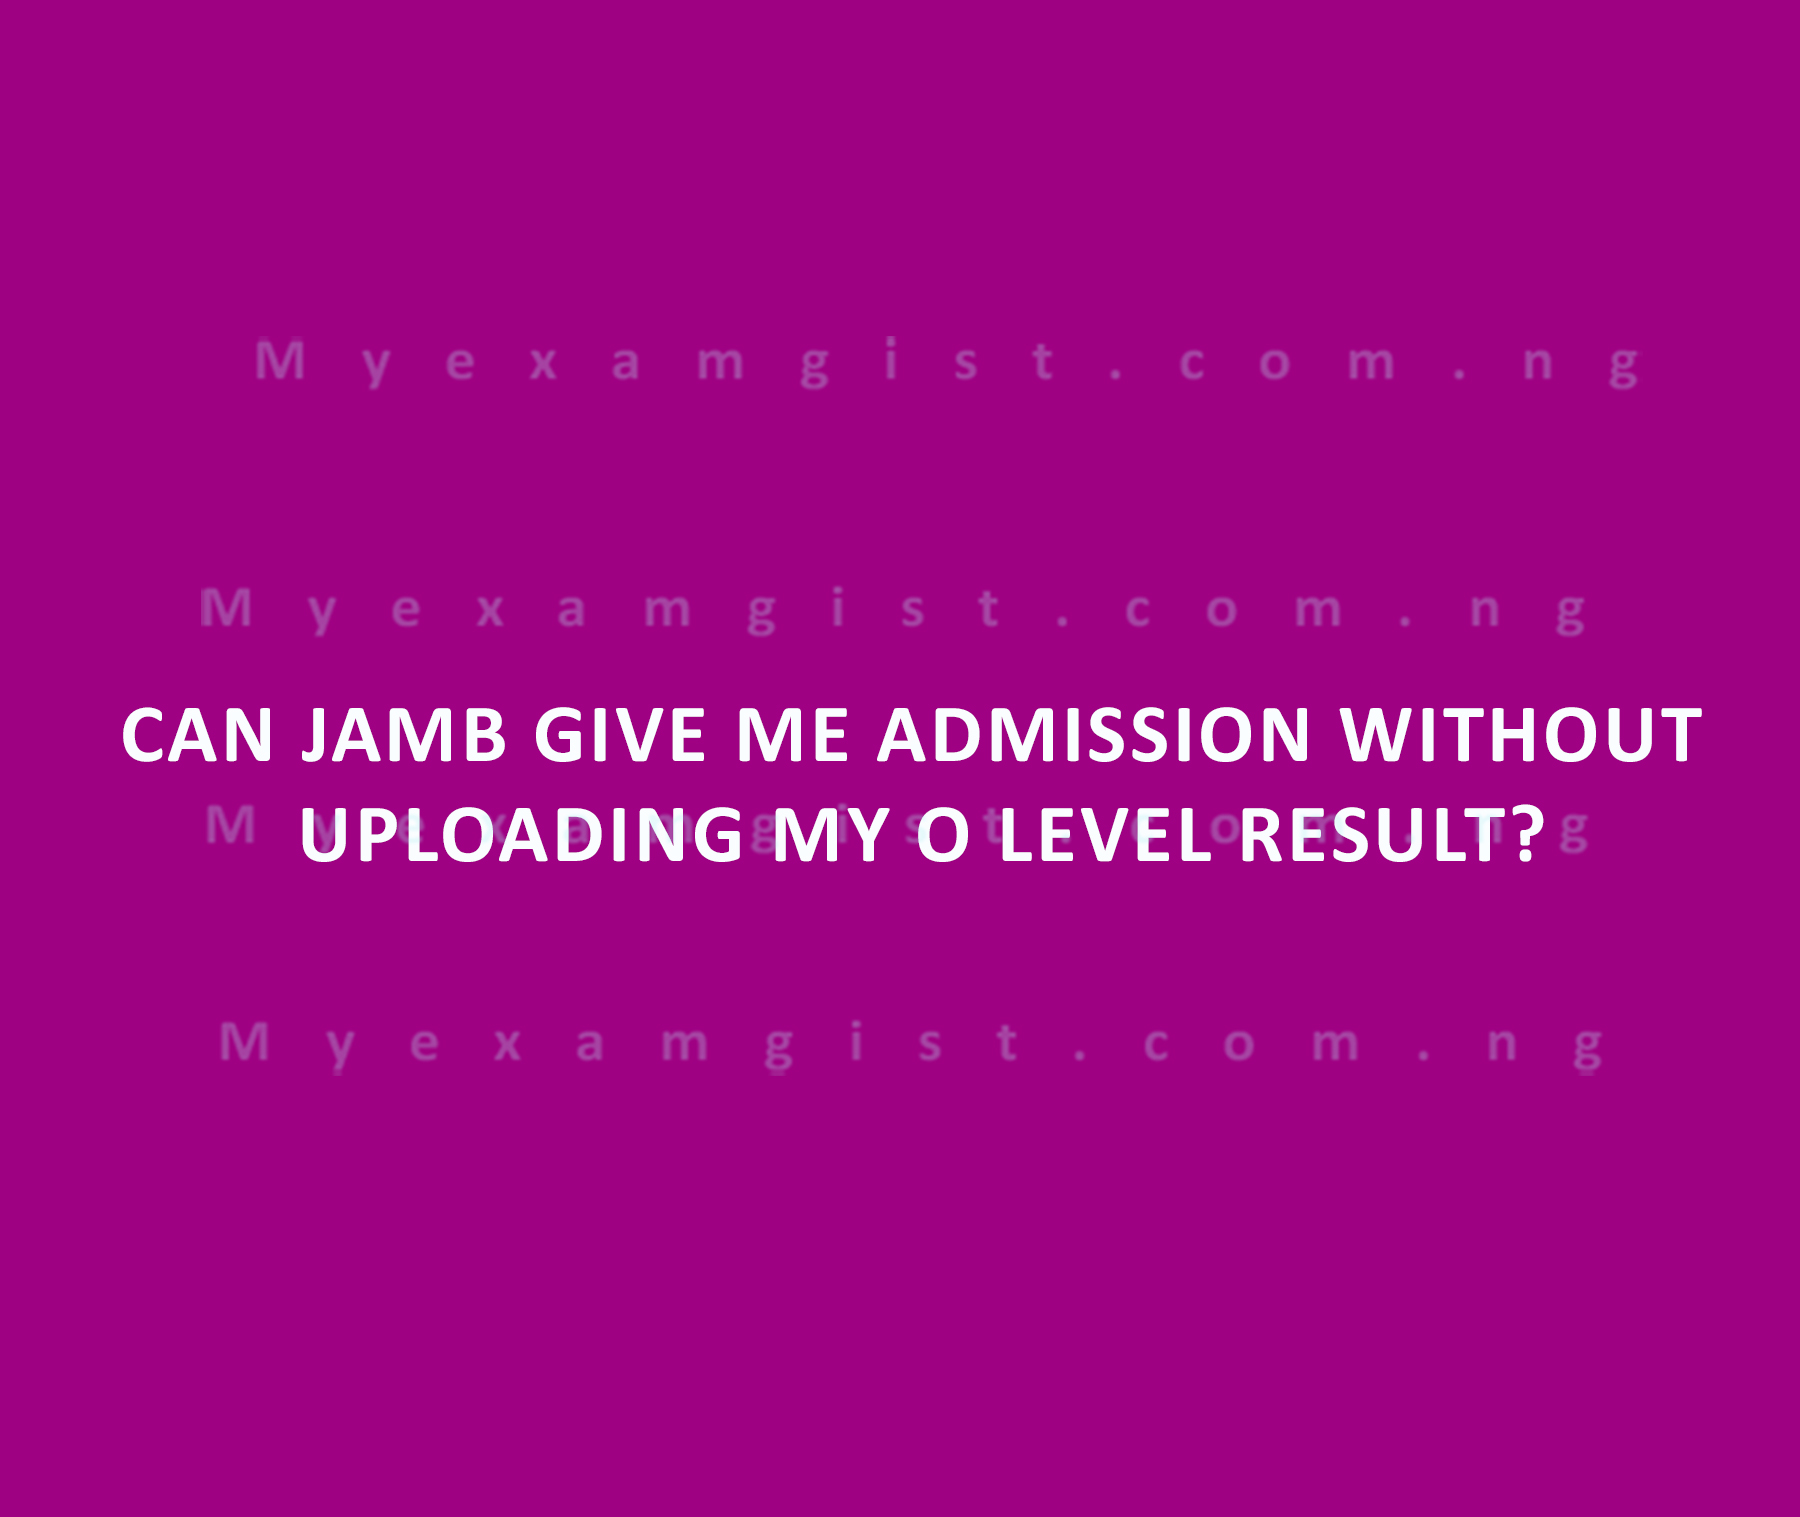 Can JAMB give me admission without uploading my O level result